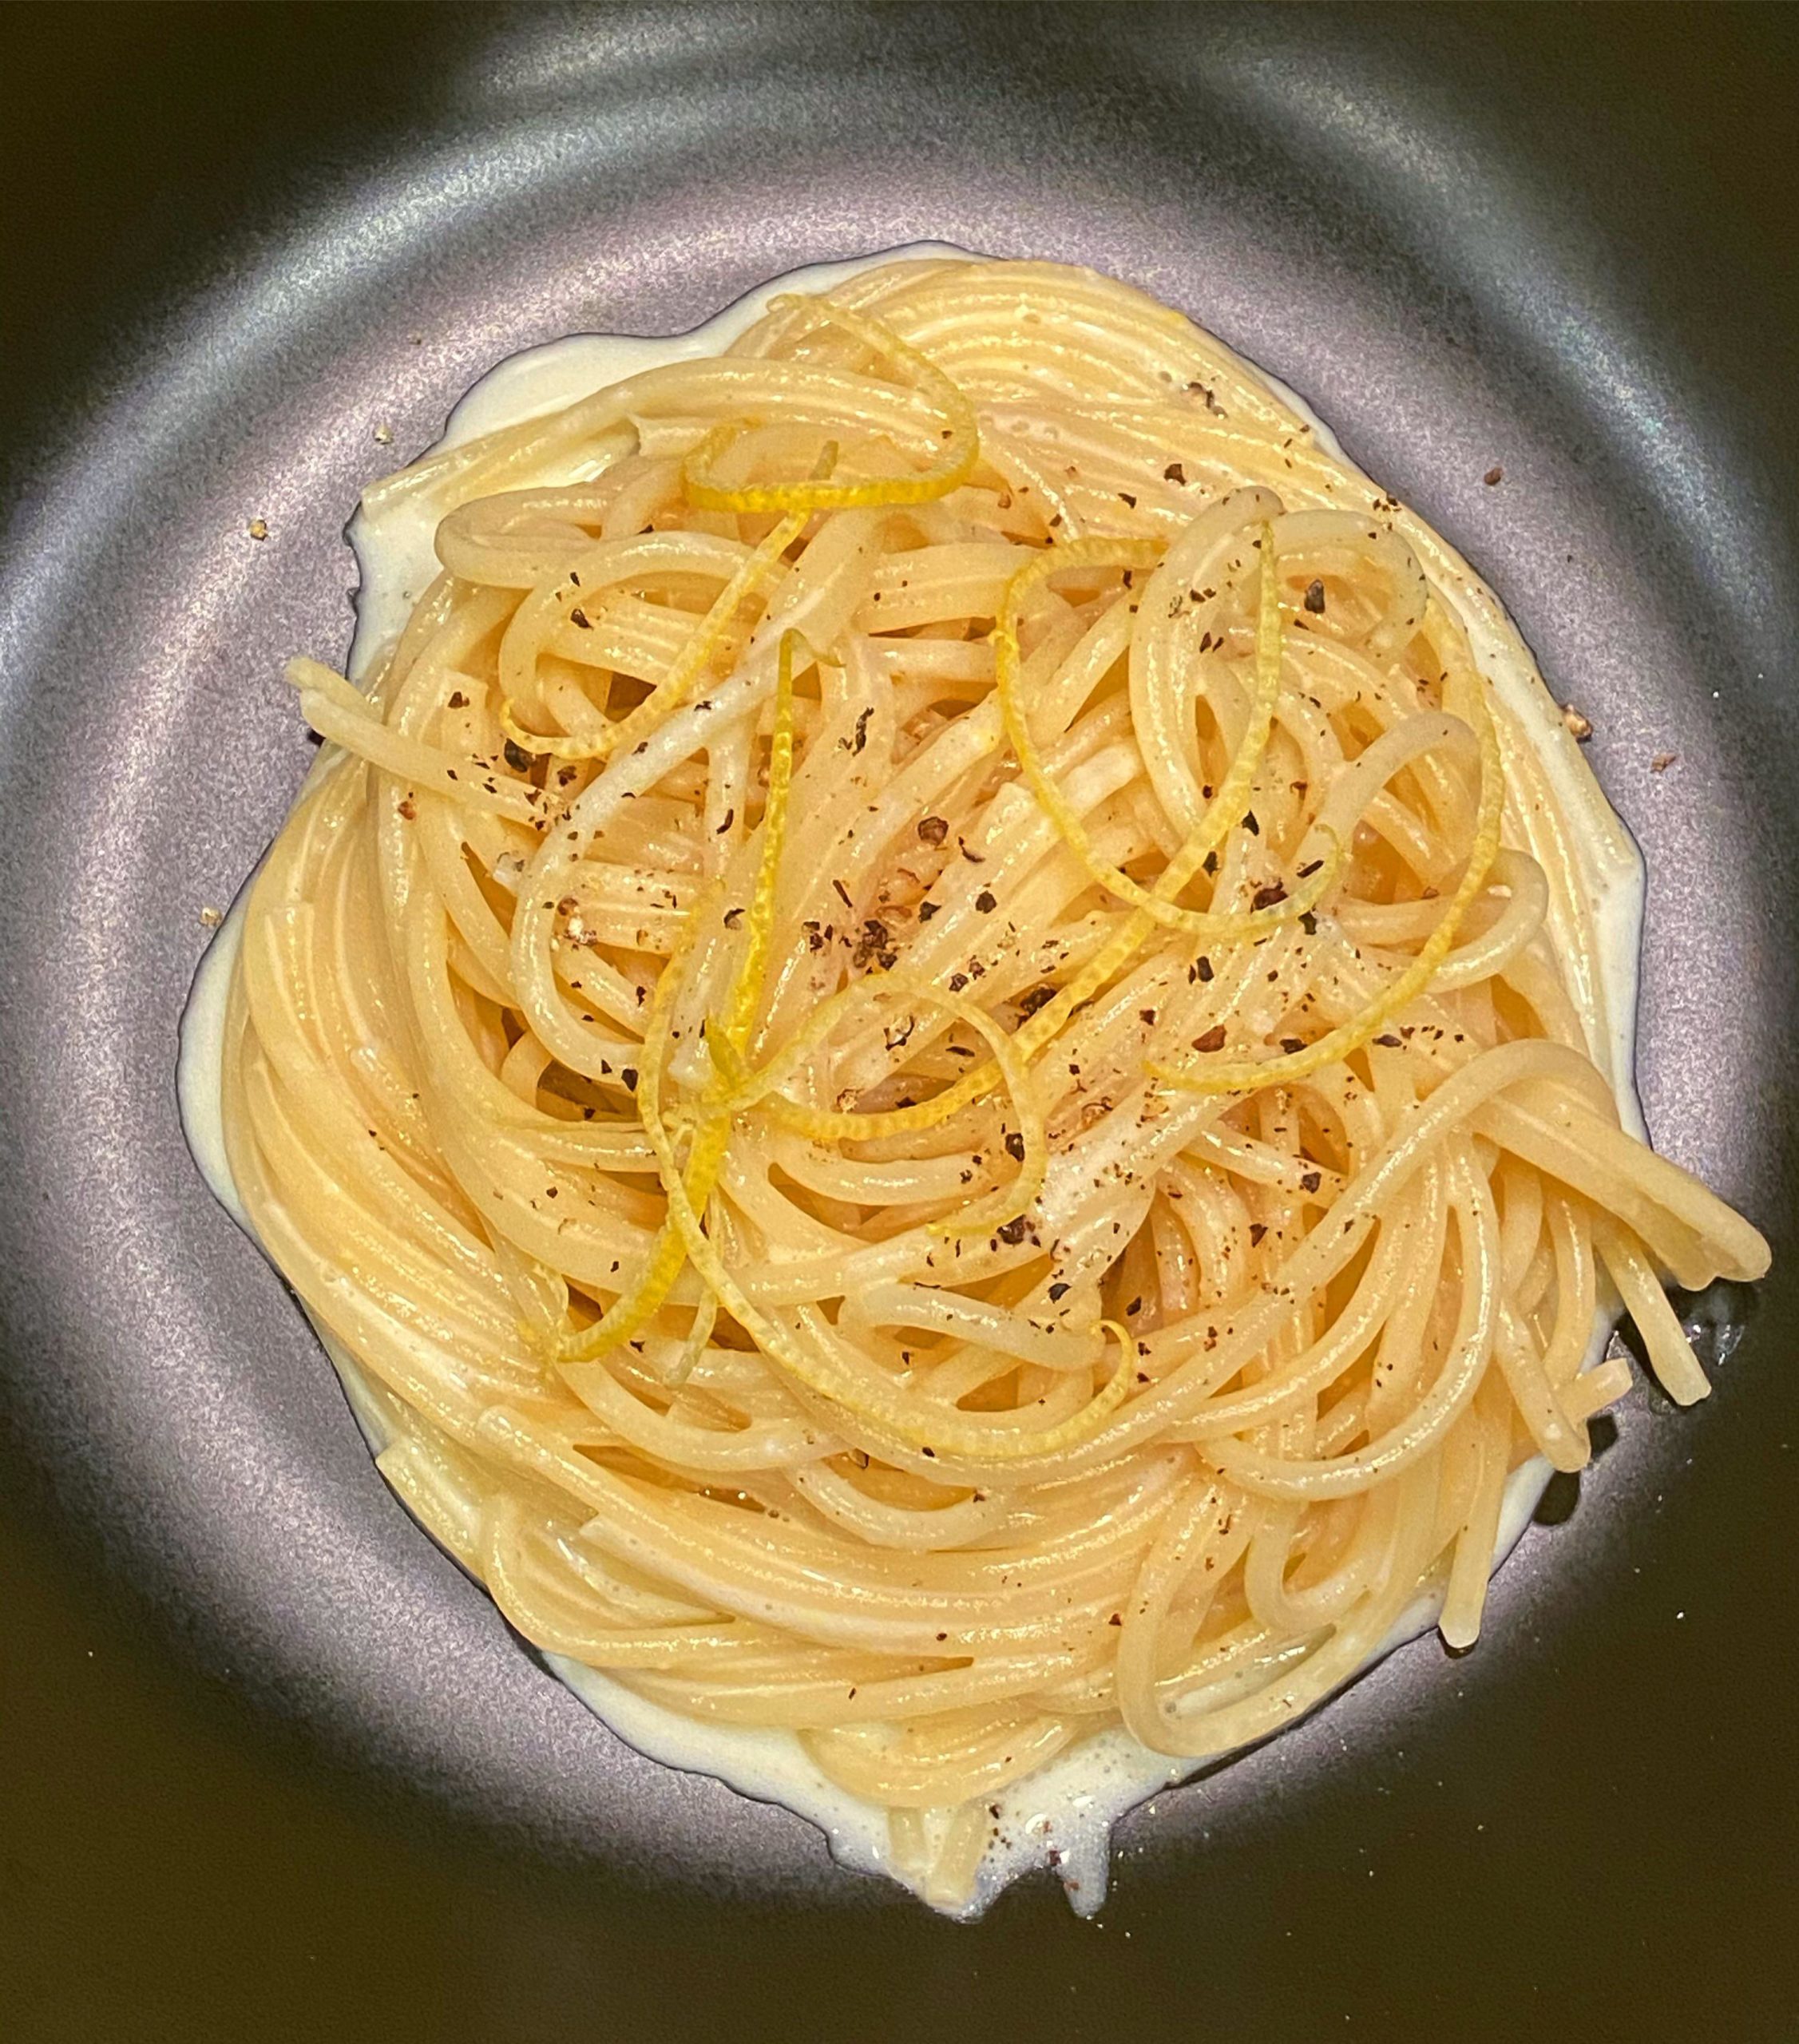 Spaghetti al Limone. Simple is best. - Dining and Cooking